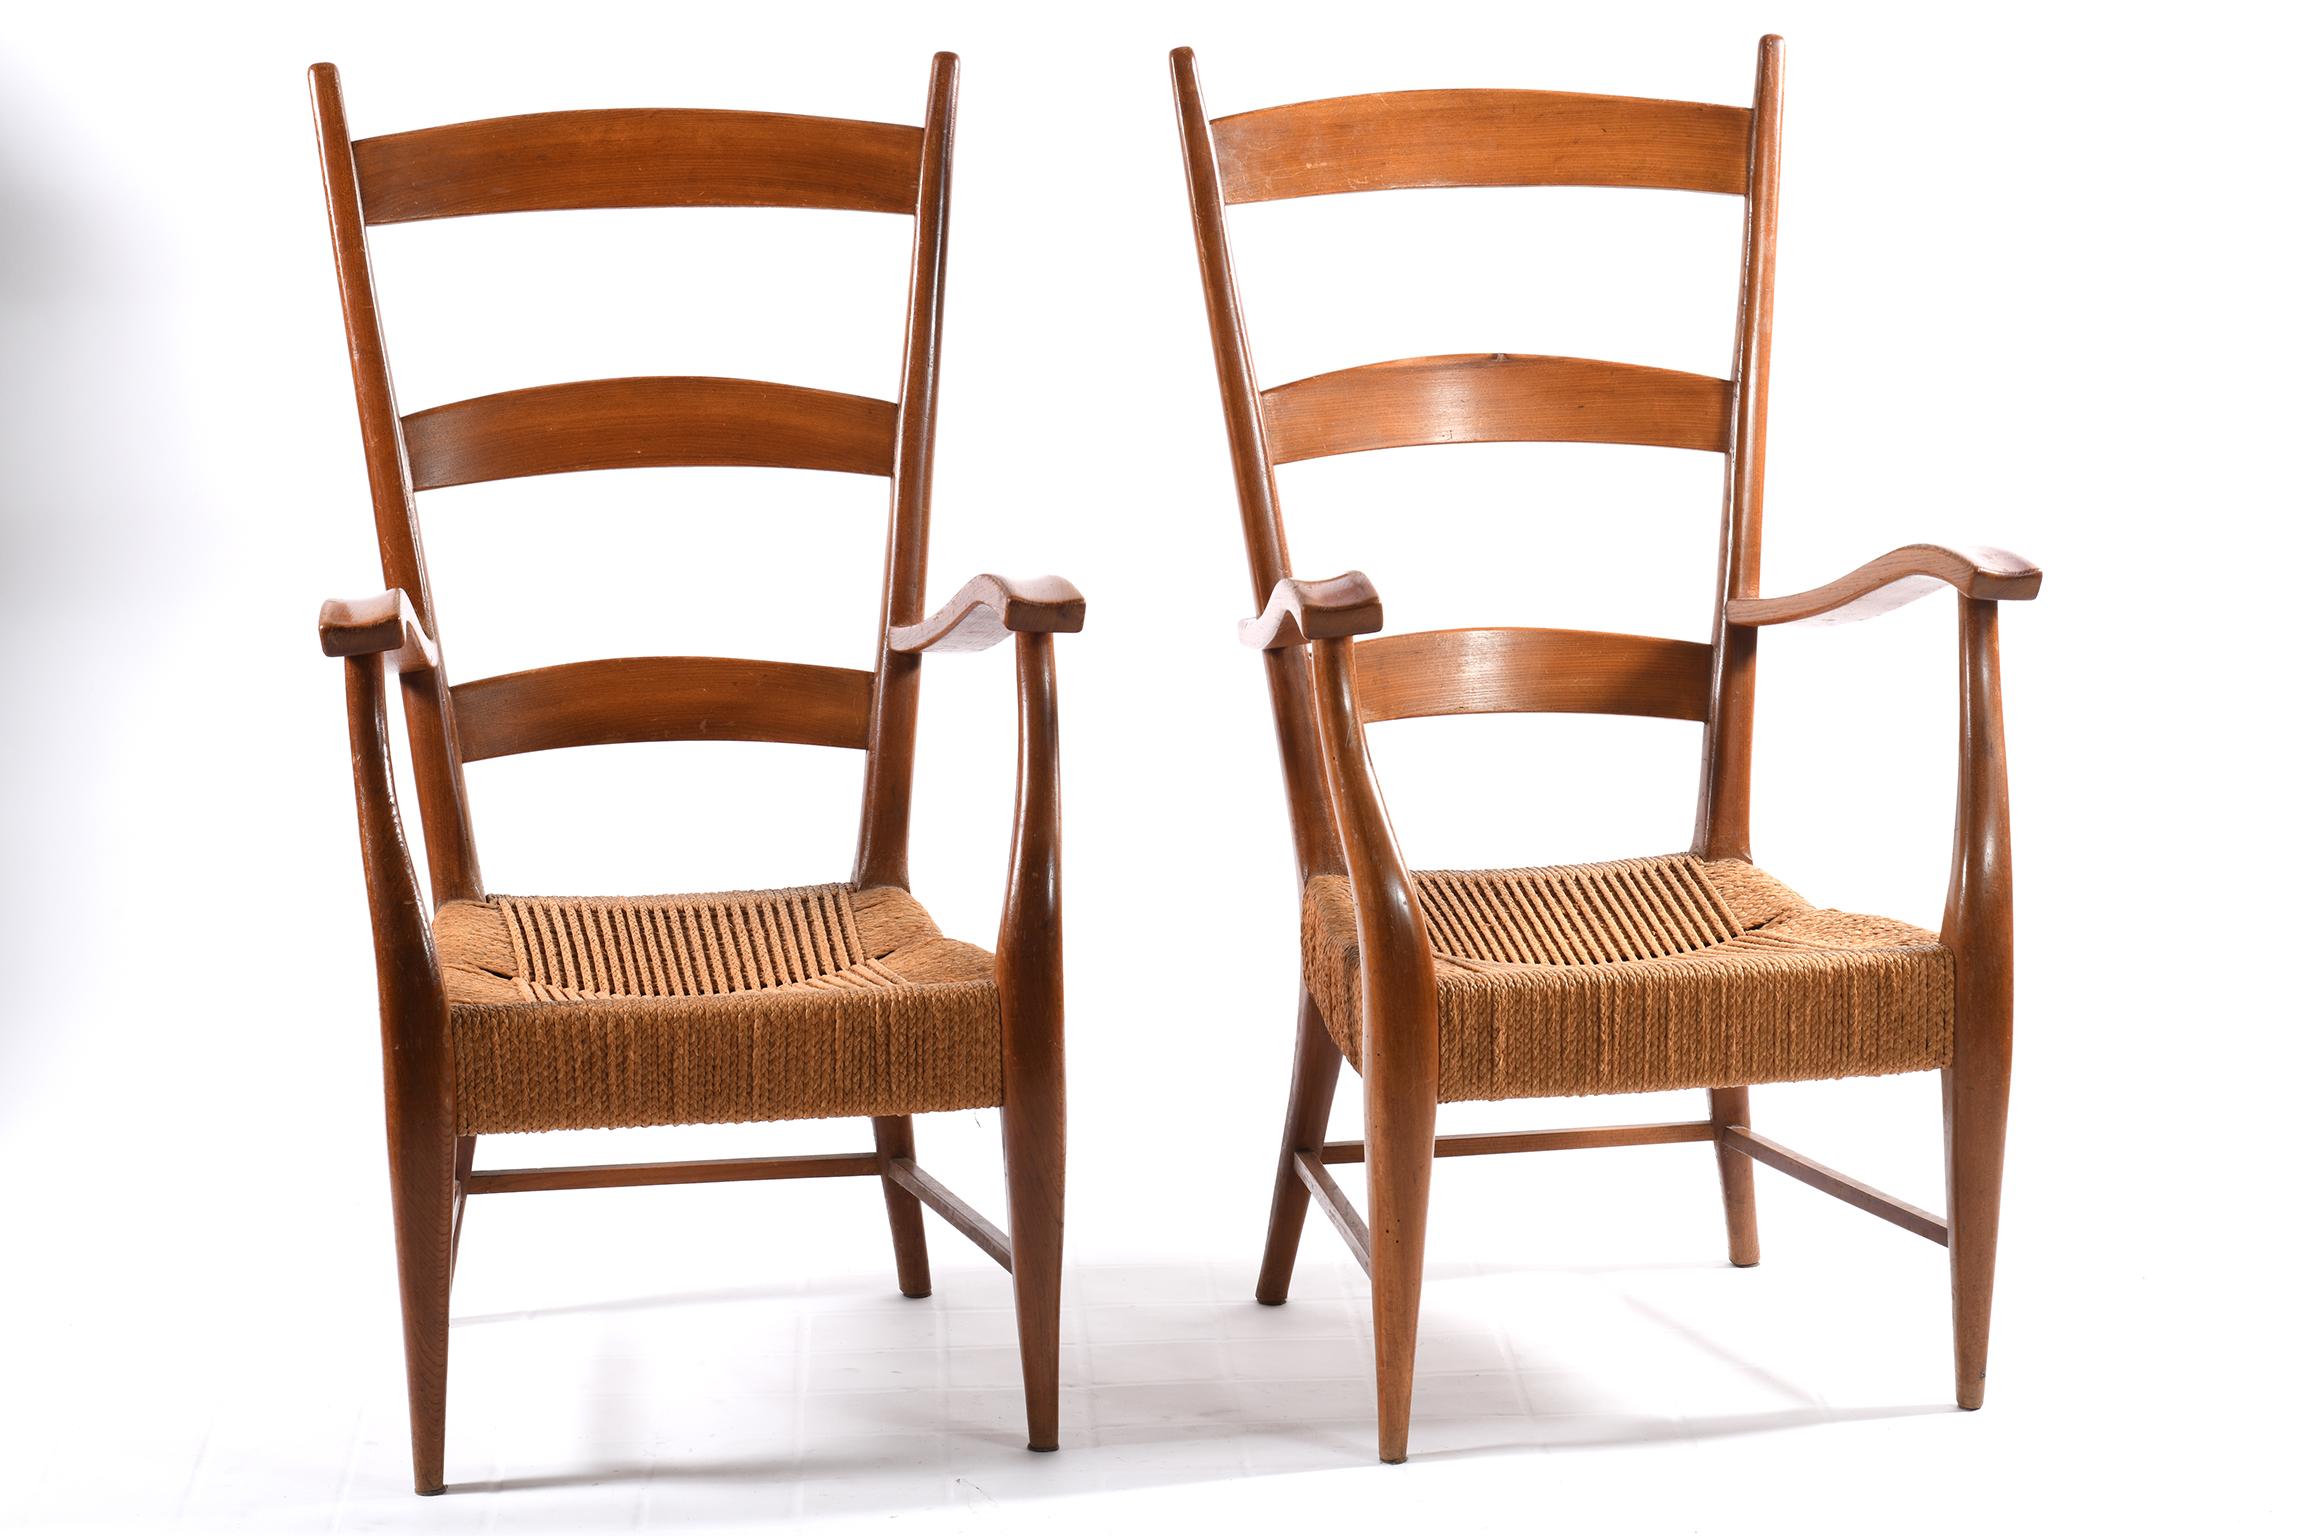 Pair of armchairs made with a high back with horizontal slats and armrests shaped in sculpted solid wood. Designed and executed by Gugliemo Pecorini Florence Italy in the early 1940s of the 20th century, they present a handcrafted seat in woven